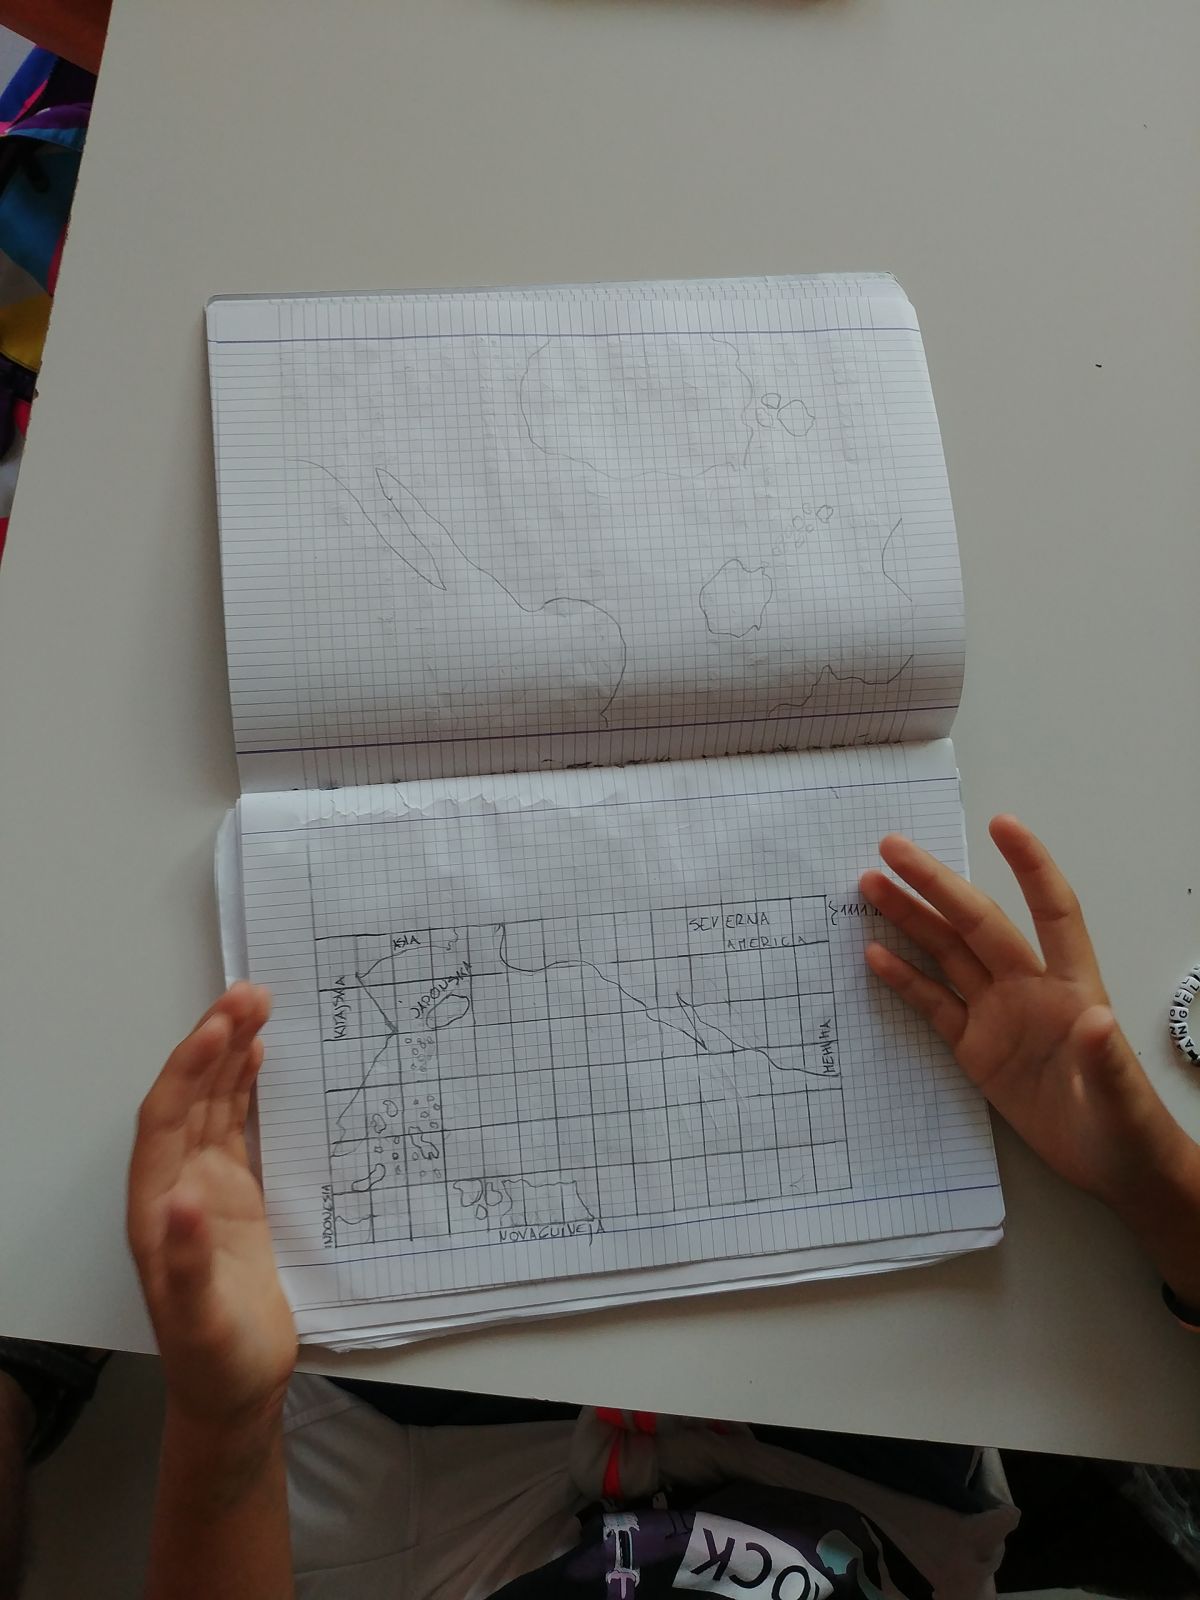 Drawing the map of the Pacific - freehand and into the rectangular grid.